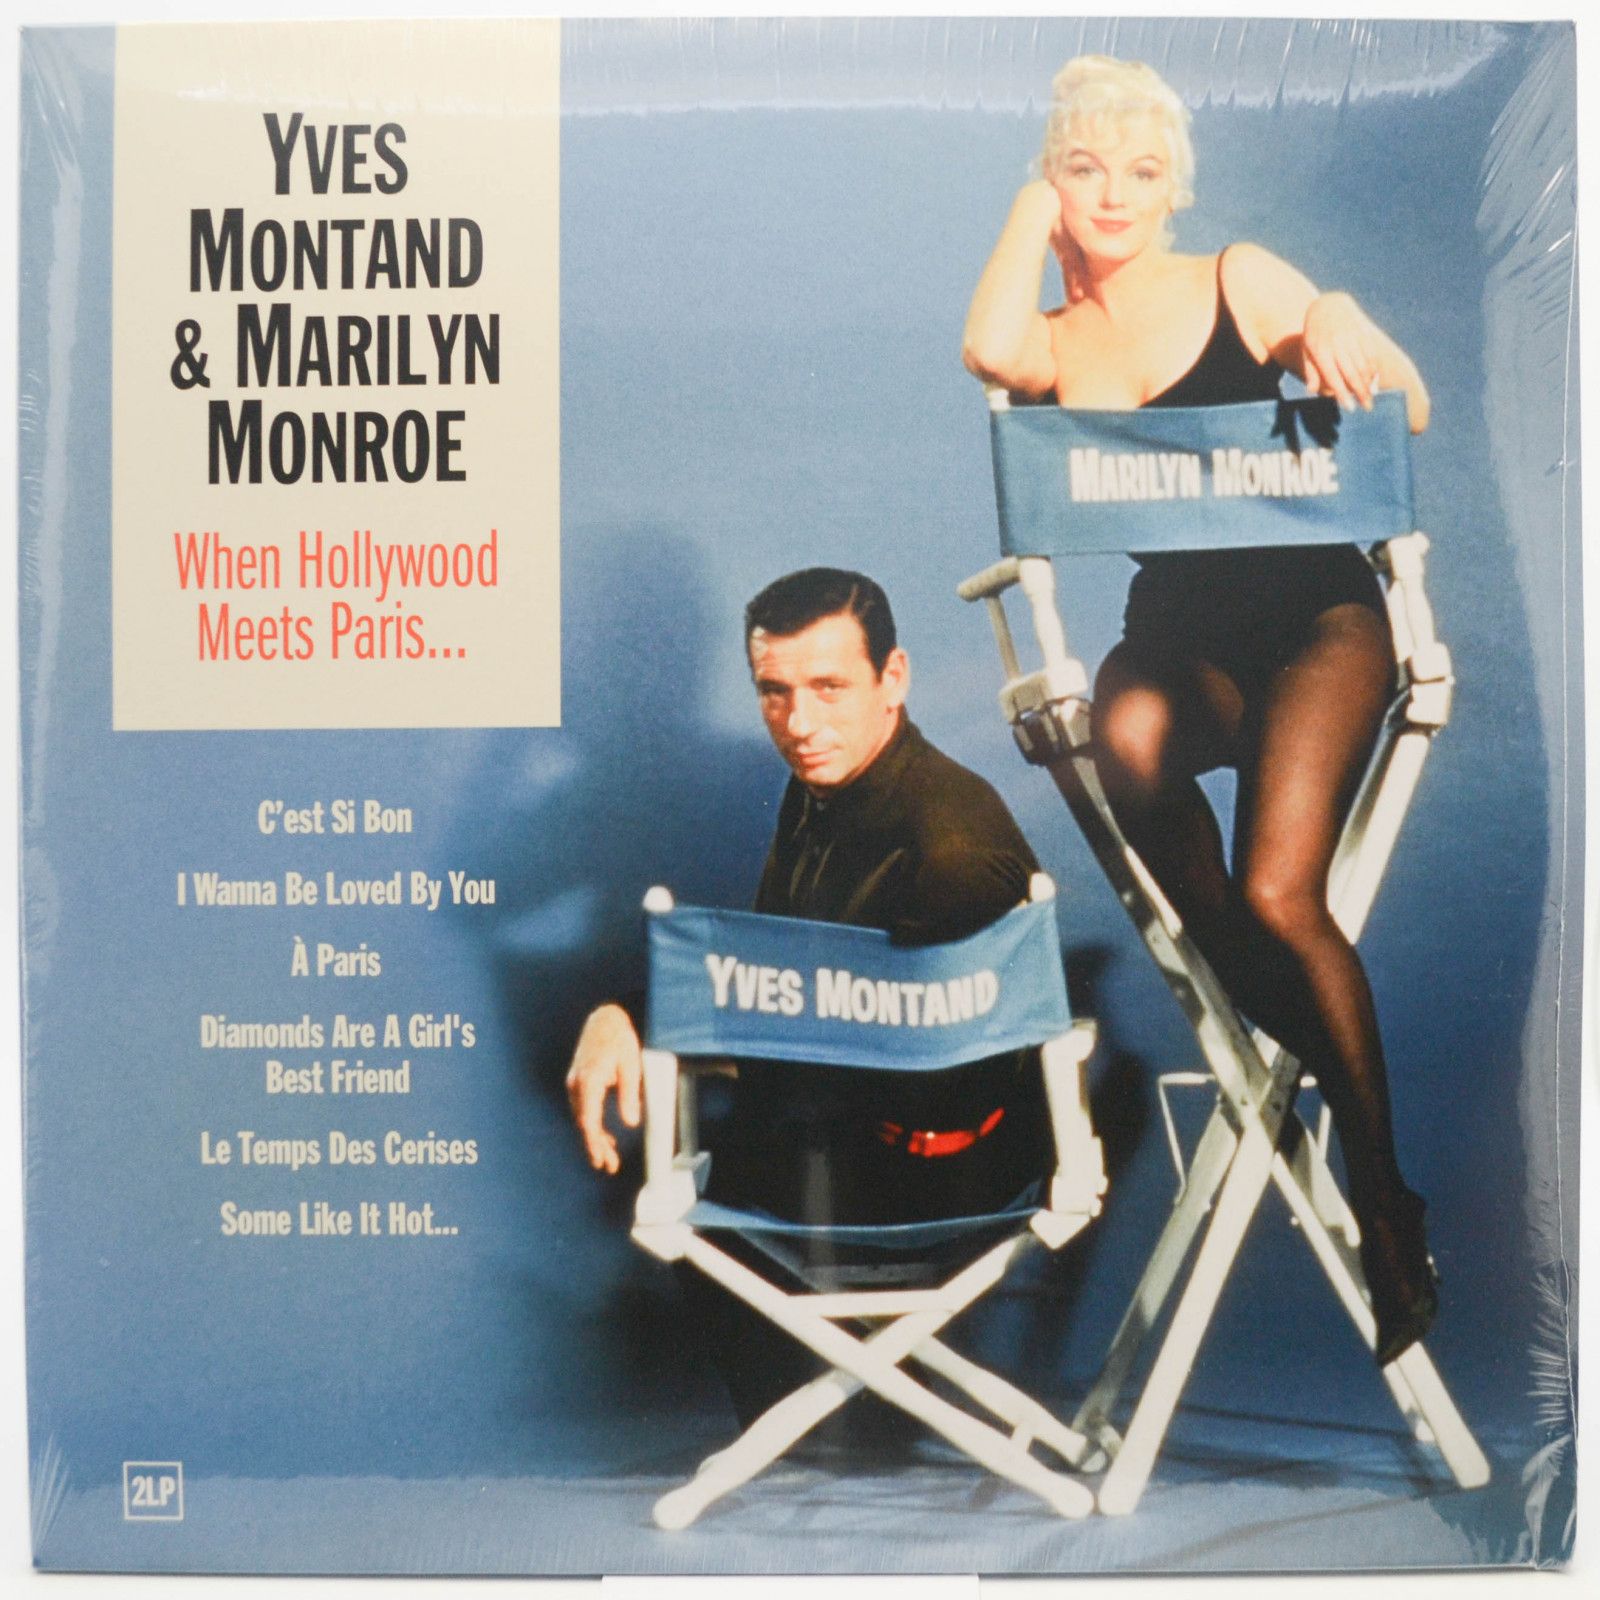 Yves Montand & Marilyn Monroe — When Hollywood meets Paris.... (2LP, France), 2021